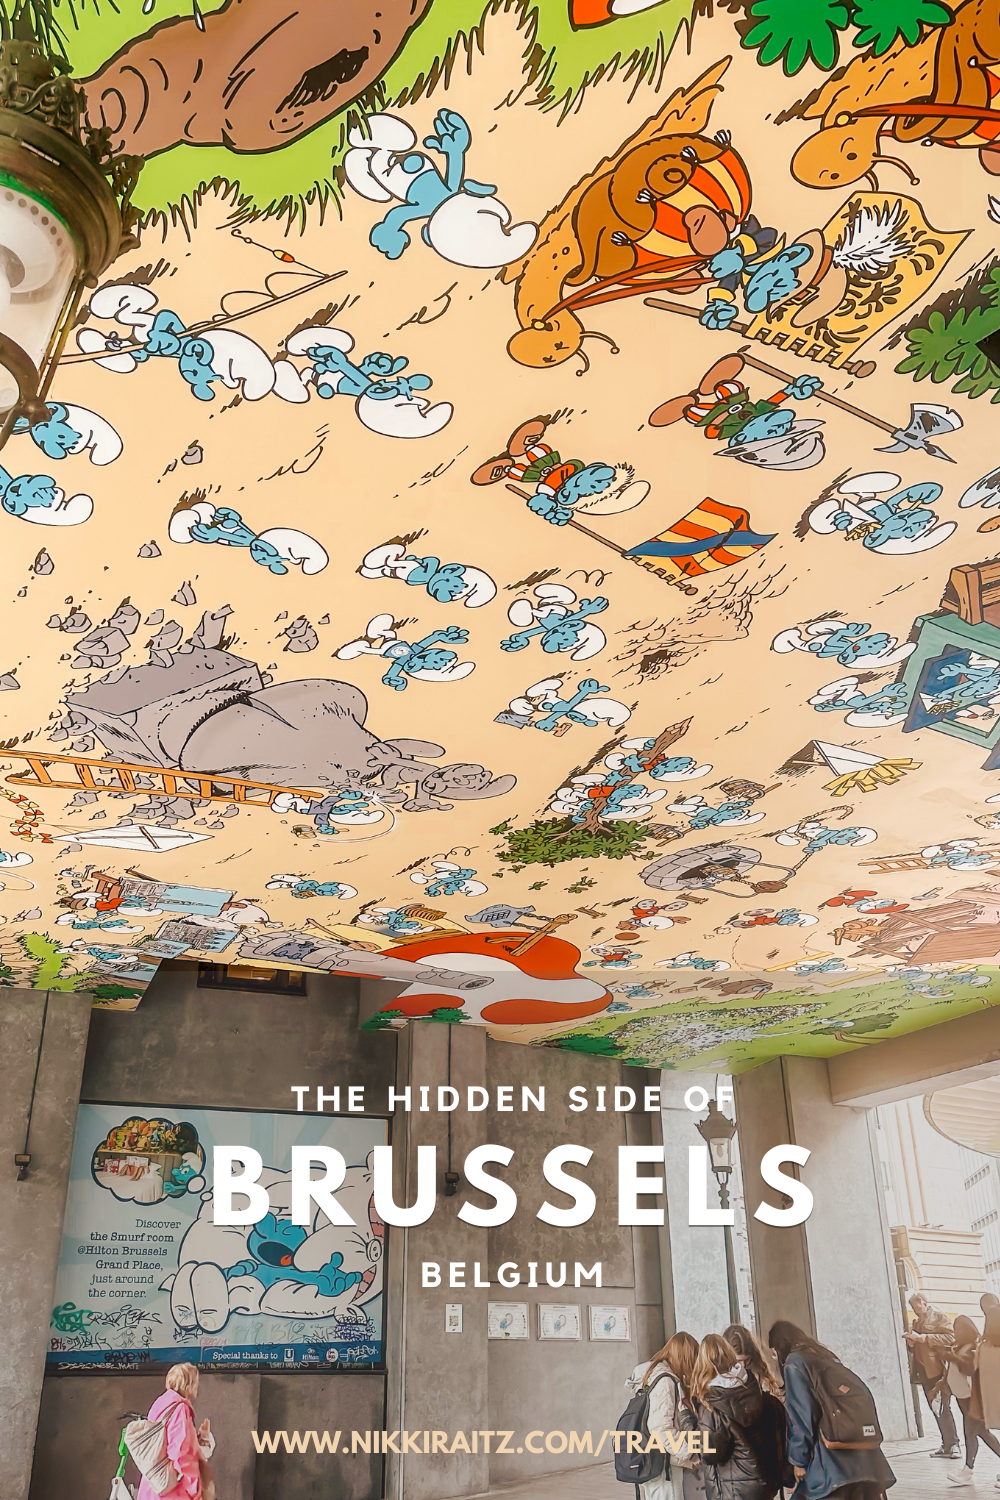 Explore the hidden gem surrounding Europe’s Comic Strip City - Brussels, Belgium. This city will satisfy every travel aesthetic with both old and modern wonders scattered throughout the city.